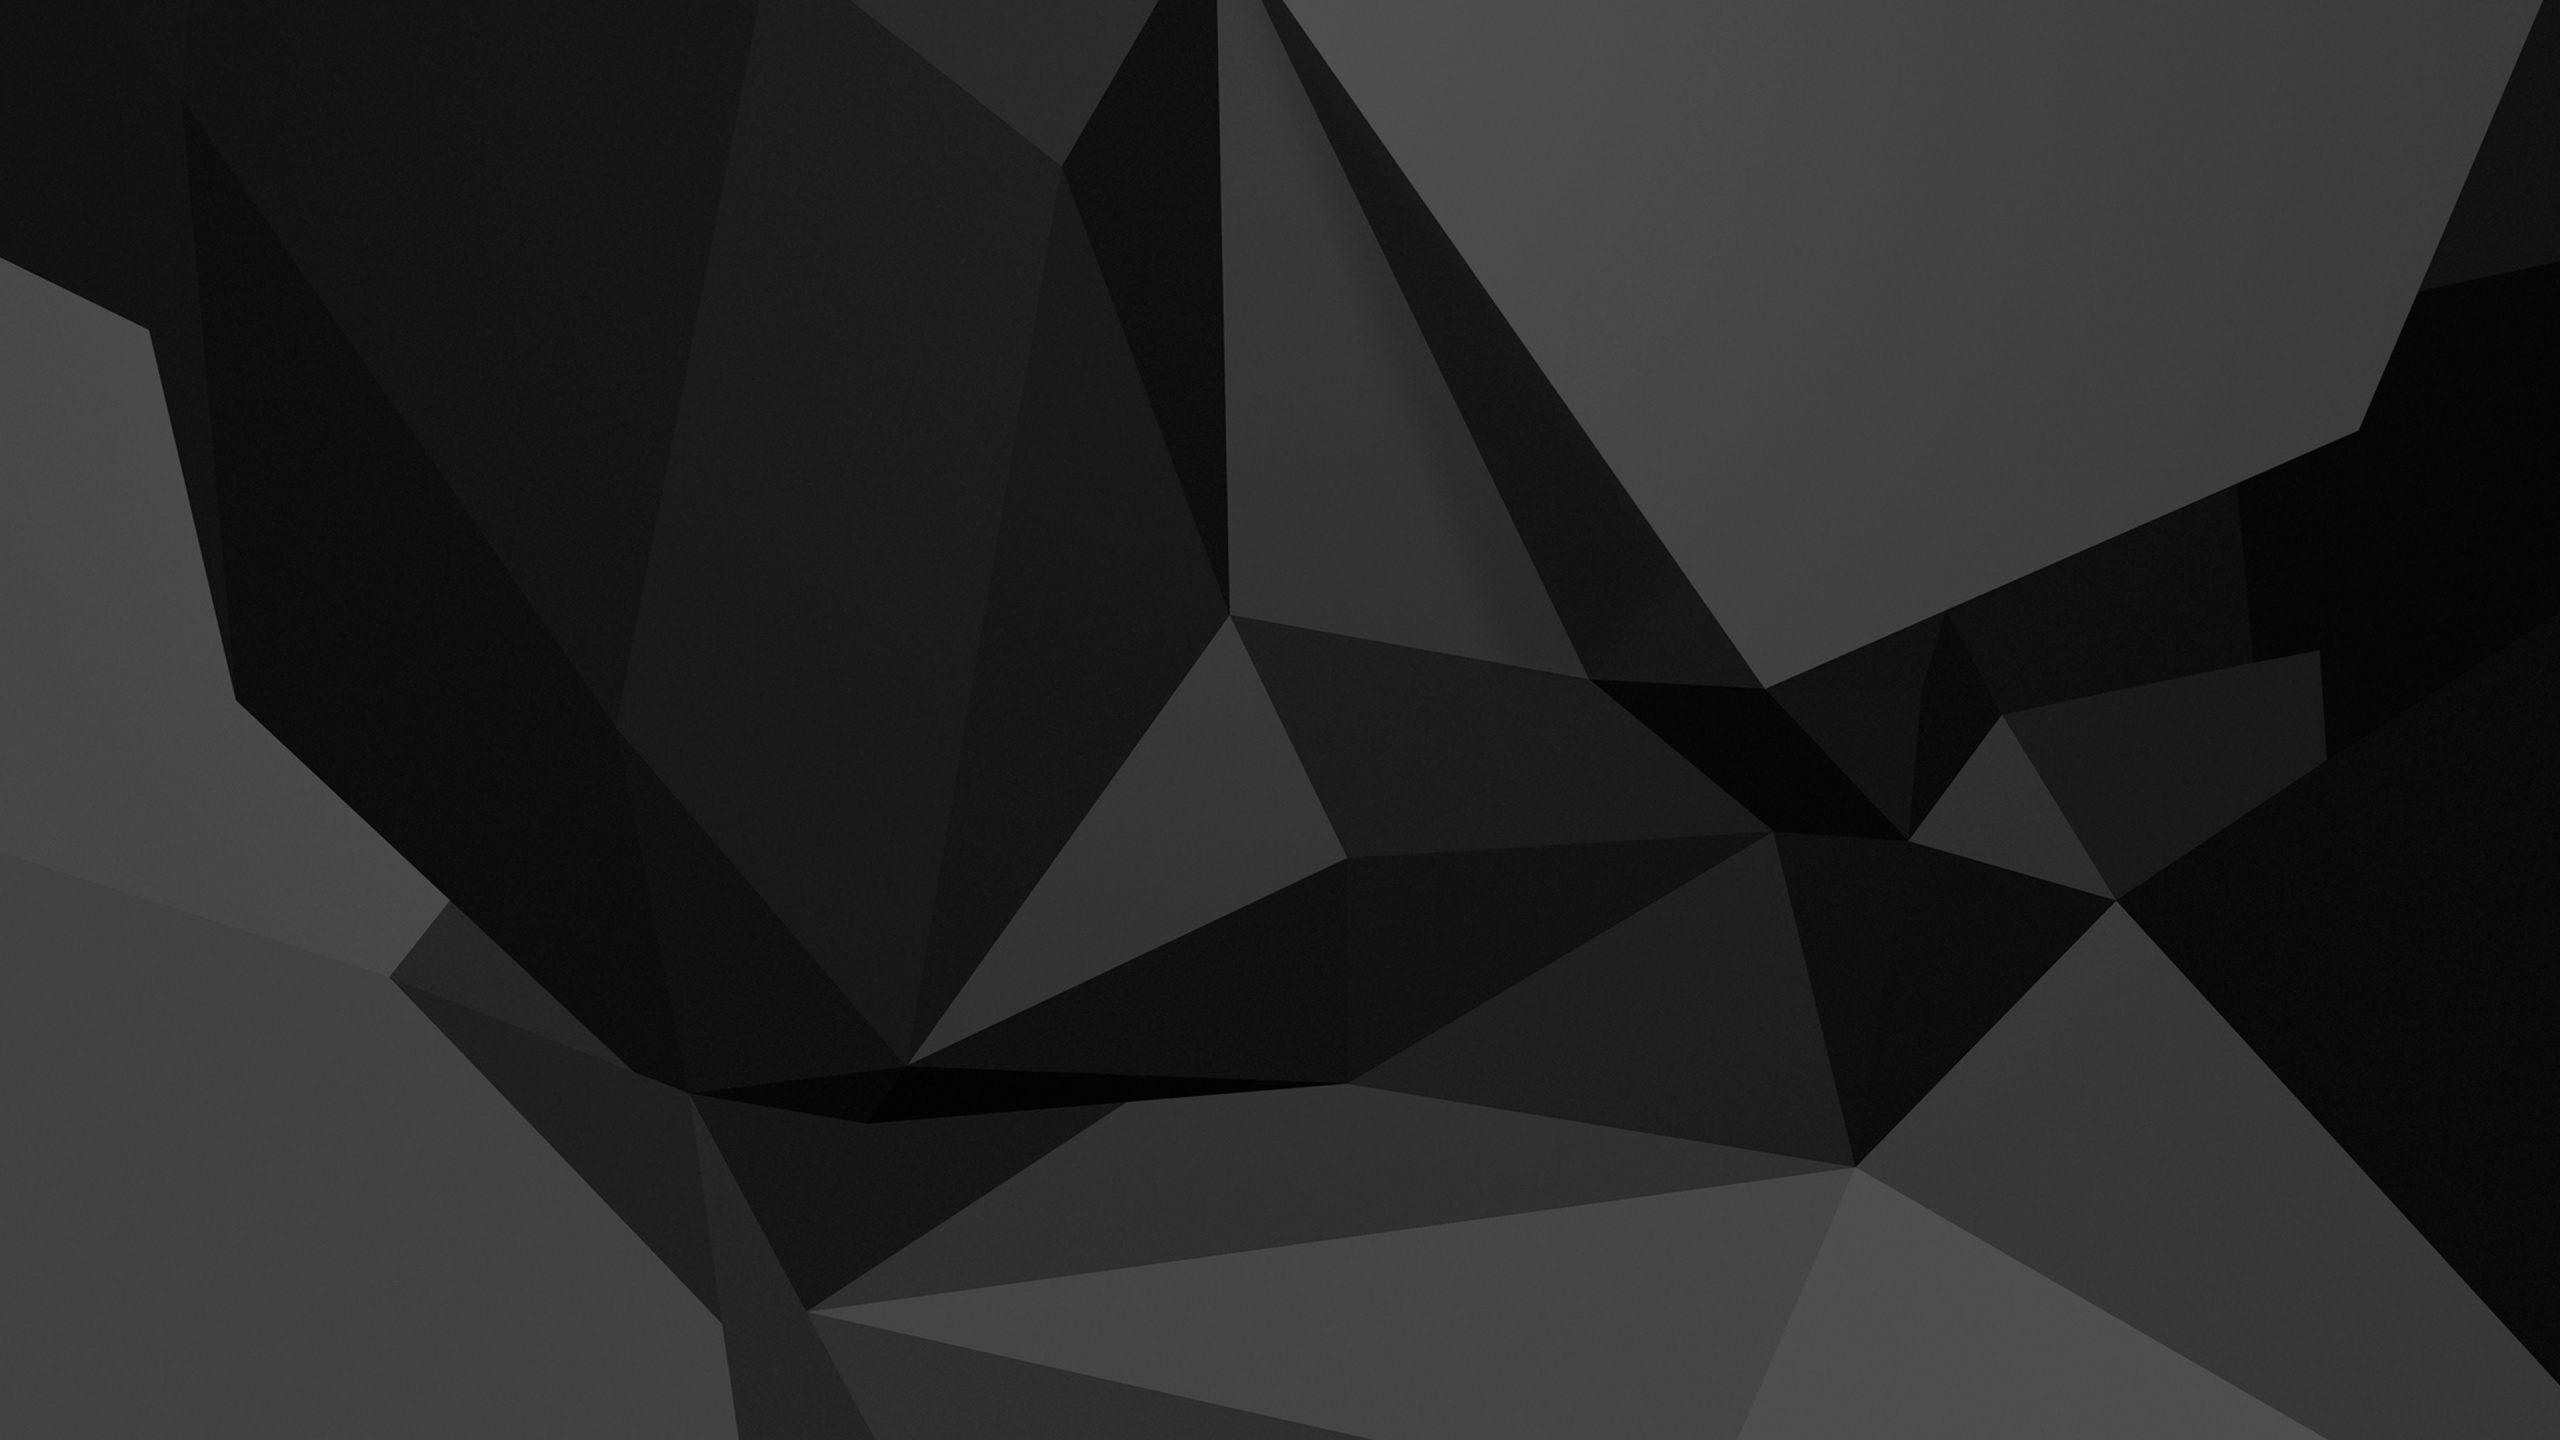 Black and White Abstract Illustration. Wallpaper in 2560x1440 Resolution